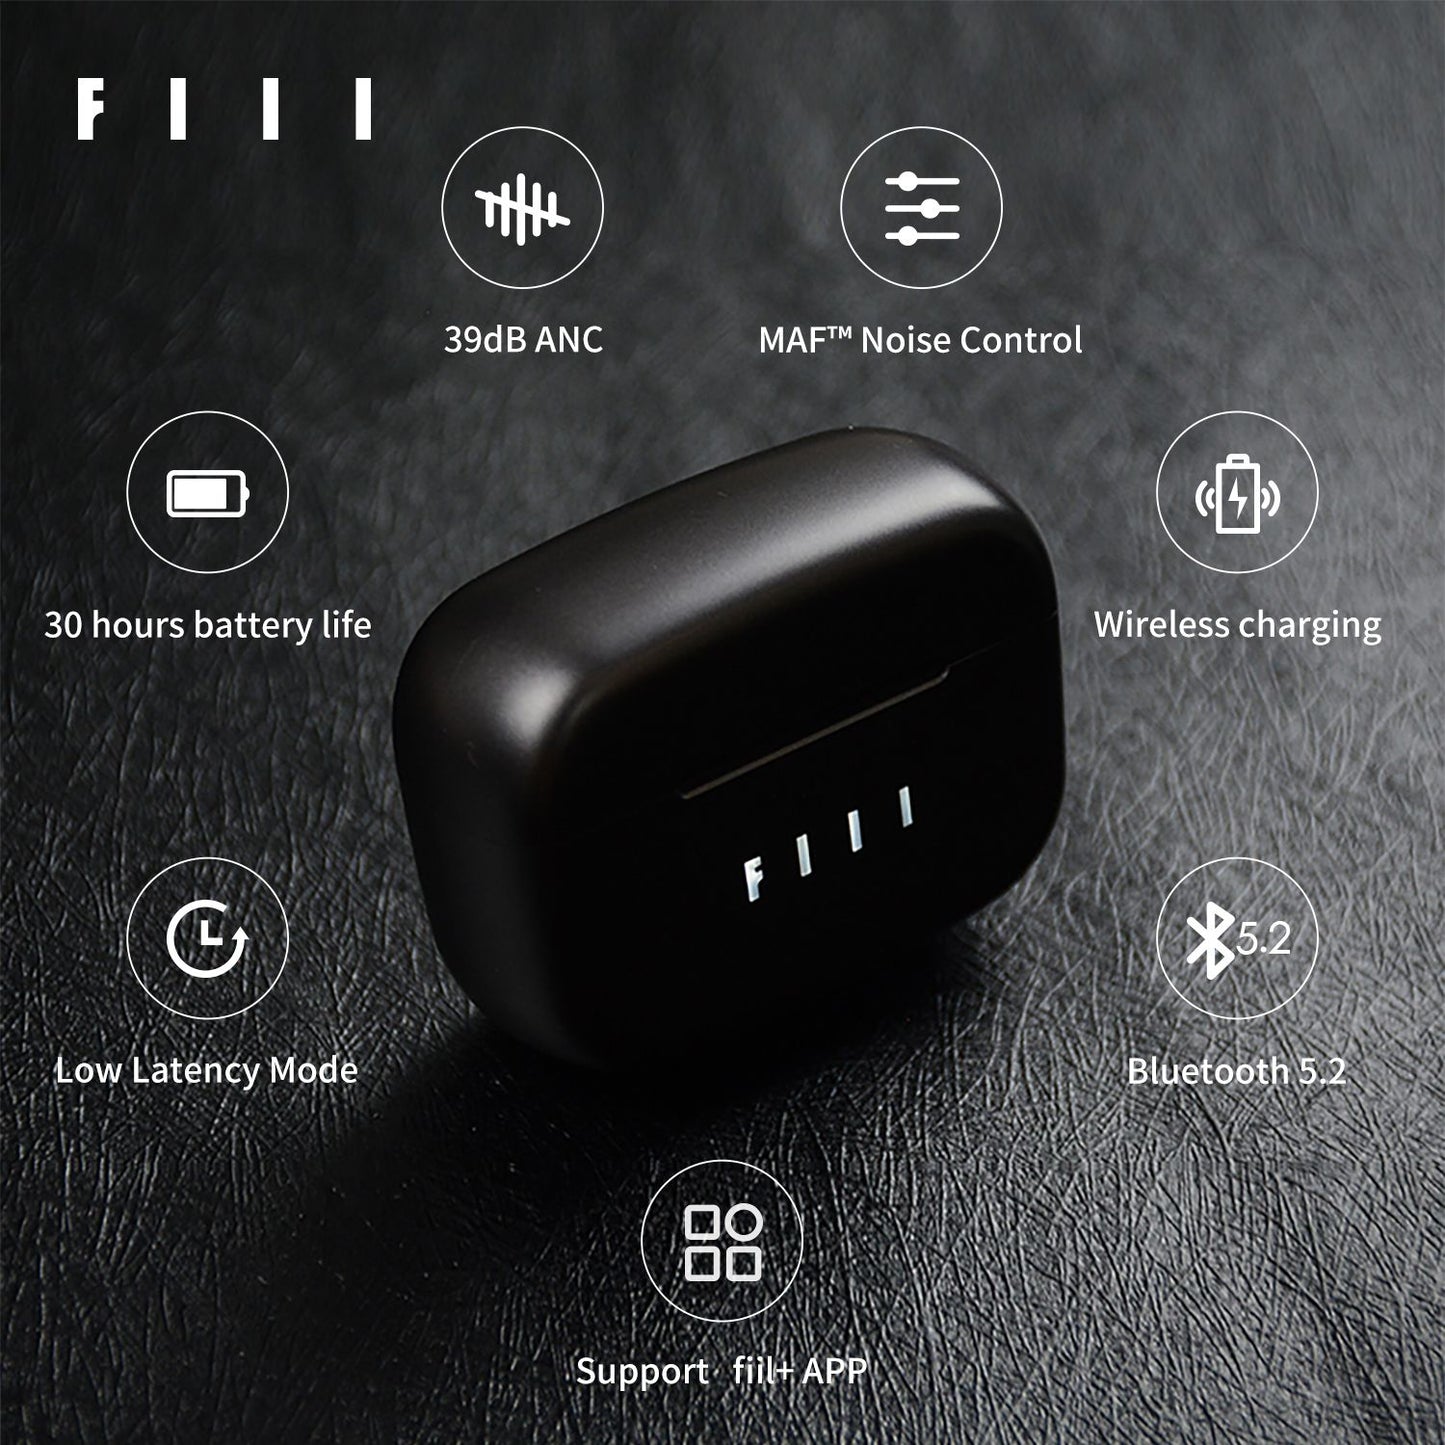 FIIL CC Pro Bluetooth 5.2 True Wireless Earbuds, 30 Hours Playtime, in-Ear Detection, Built-in 3 Mic Call Noise Cancelling IPX4 Water-resistant earphones, with Wireless Charging Case for Sport